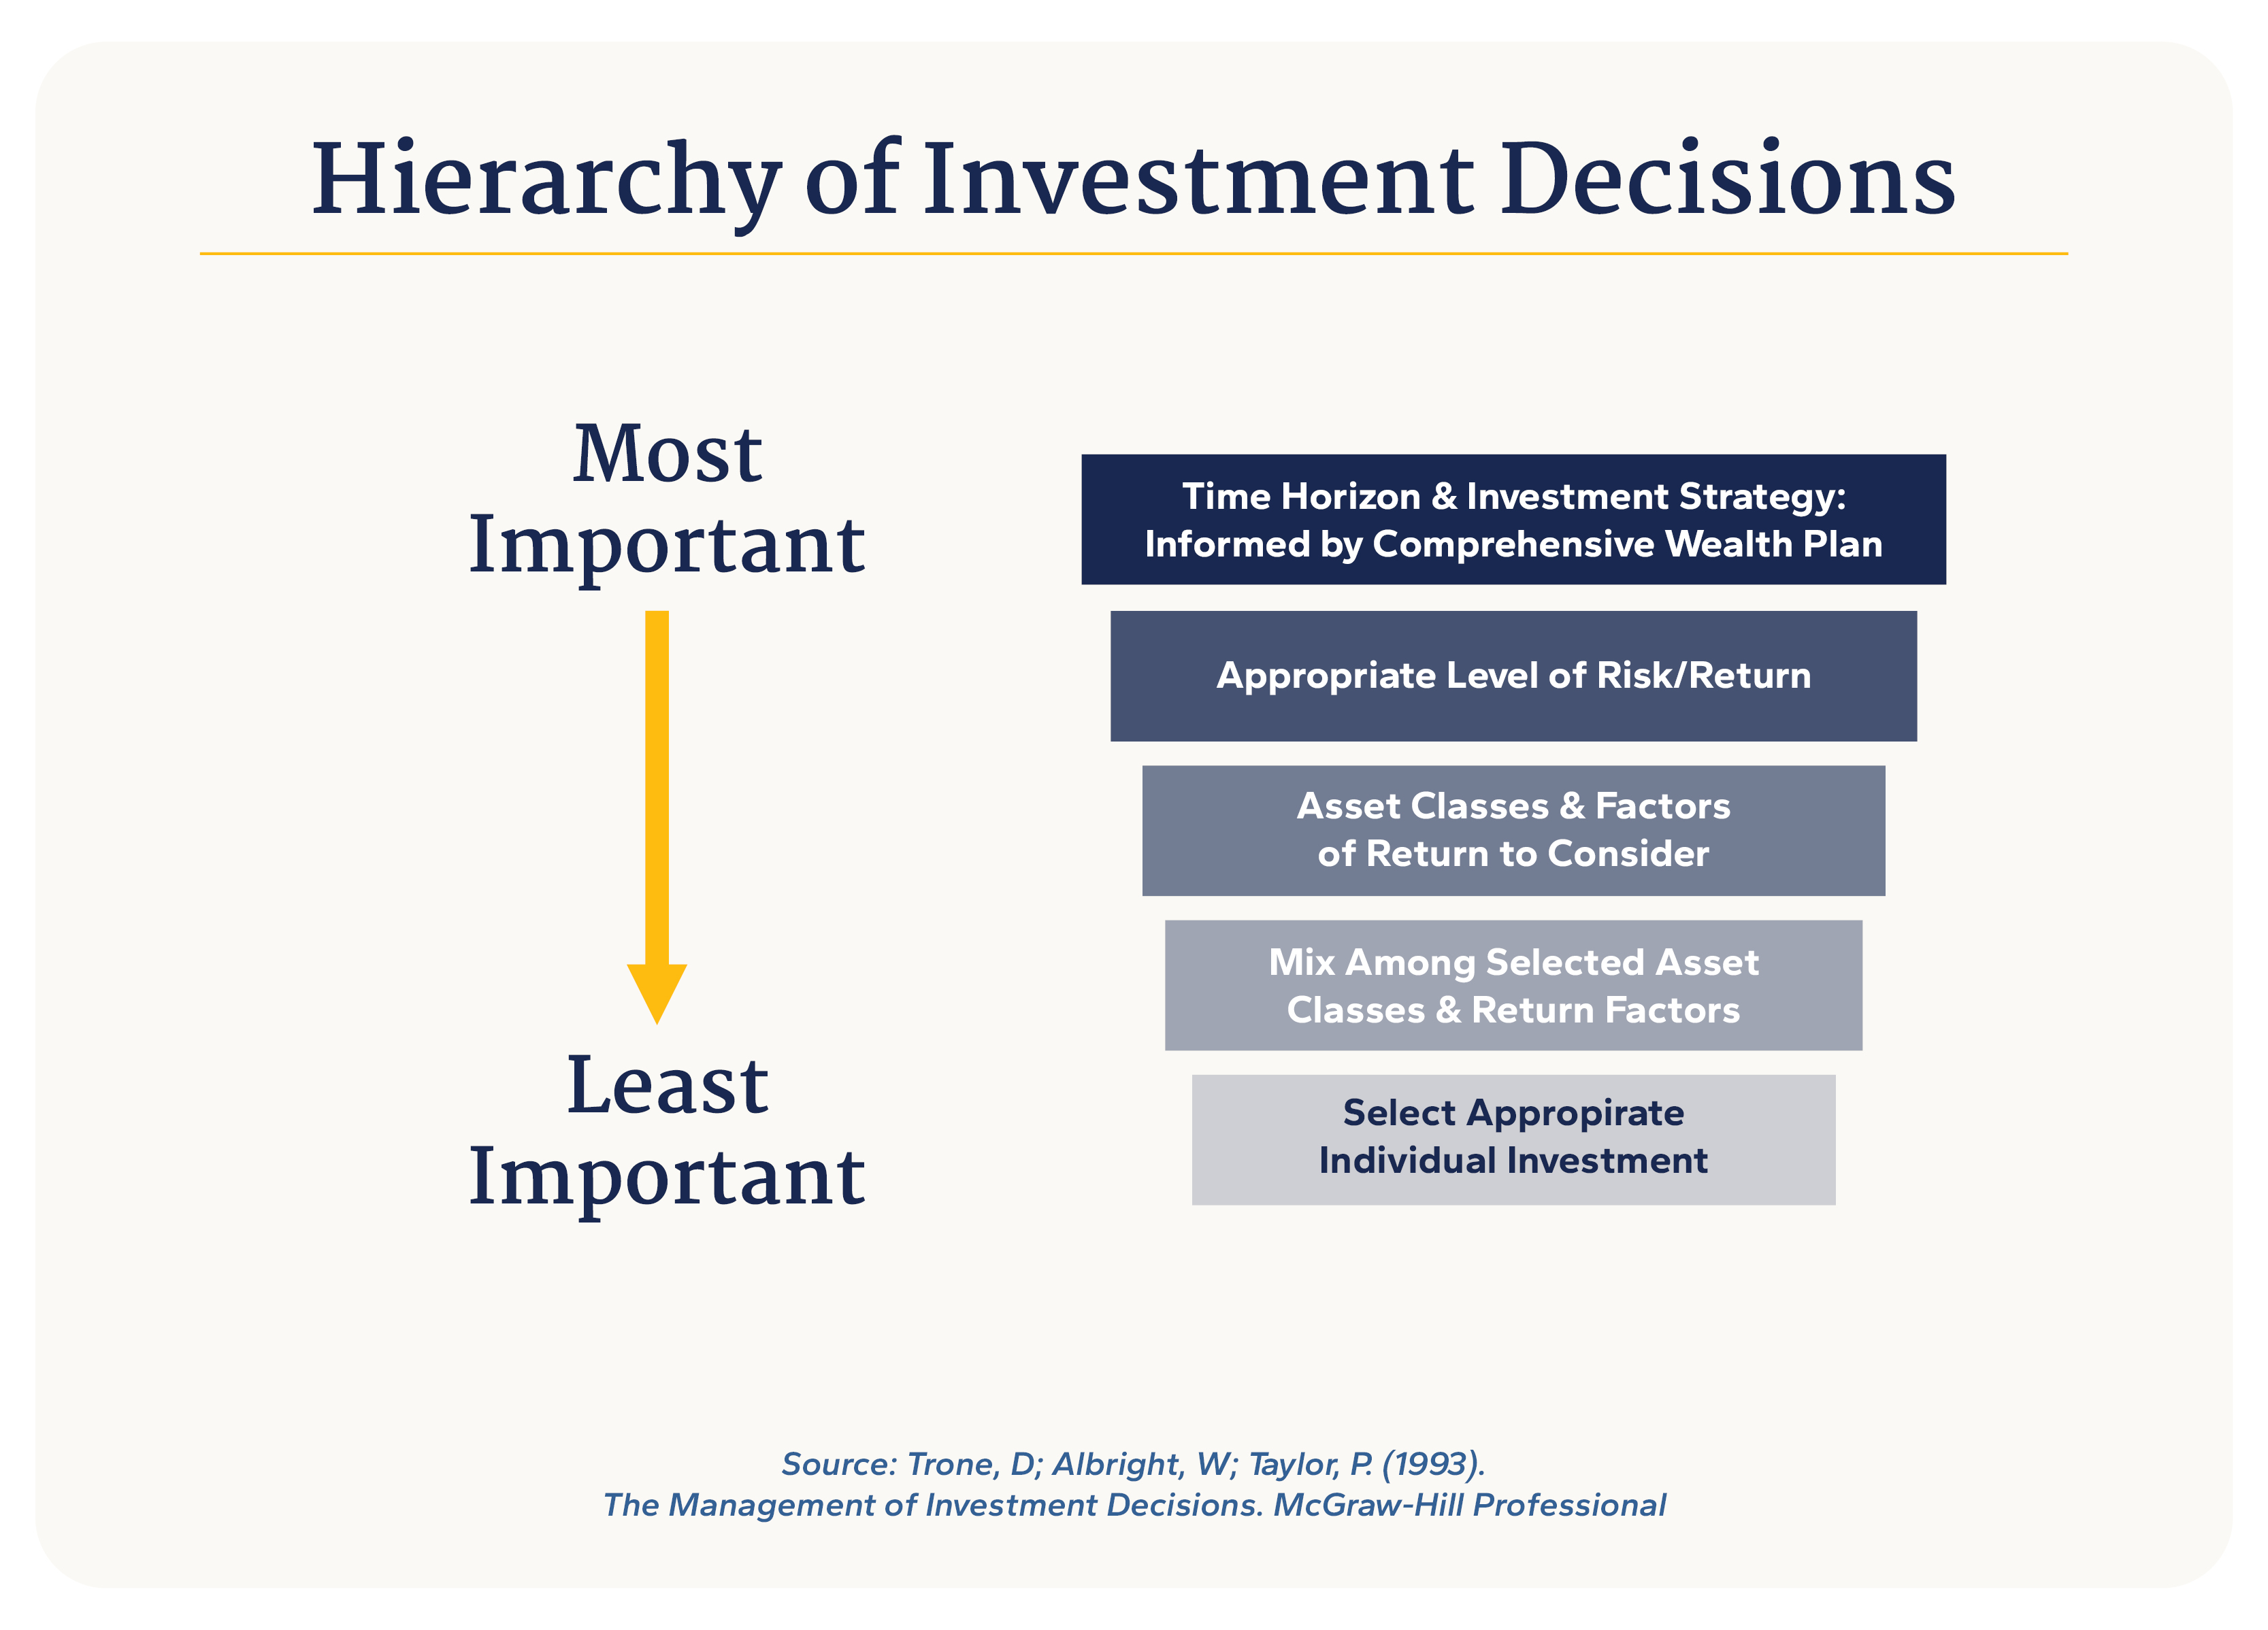 graphic explaining the hierarchy of investment decisions from most important to least important